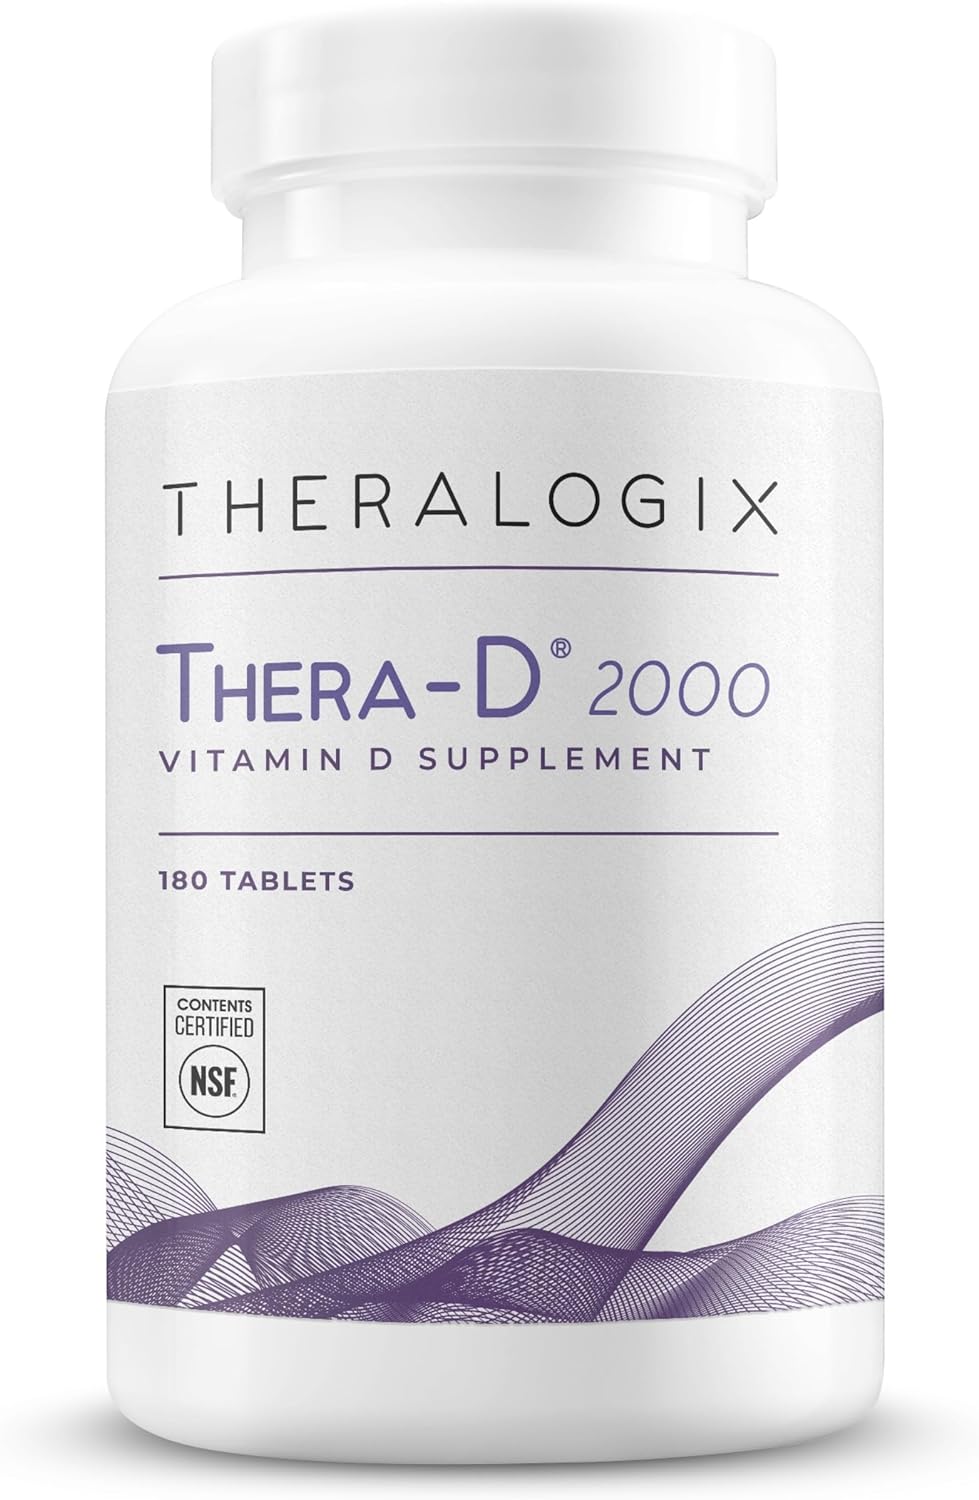 Theralogix Thera-D 2000 Vitamin D Supplement - 2,000IU (50 mcg) Vitamin D3 Tablets - 180-Day Supply - Immune Support Supplement for Women & Men - Aids Bone & Heart Health - NSF Certified - 180 Tablets